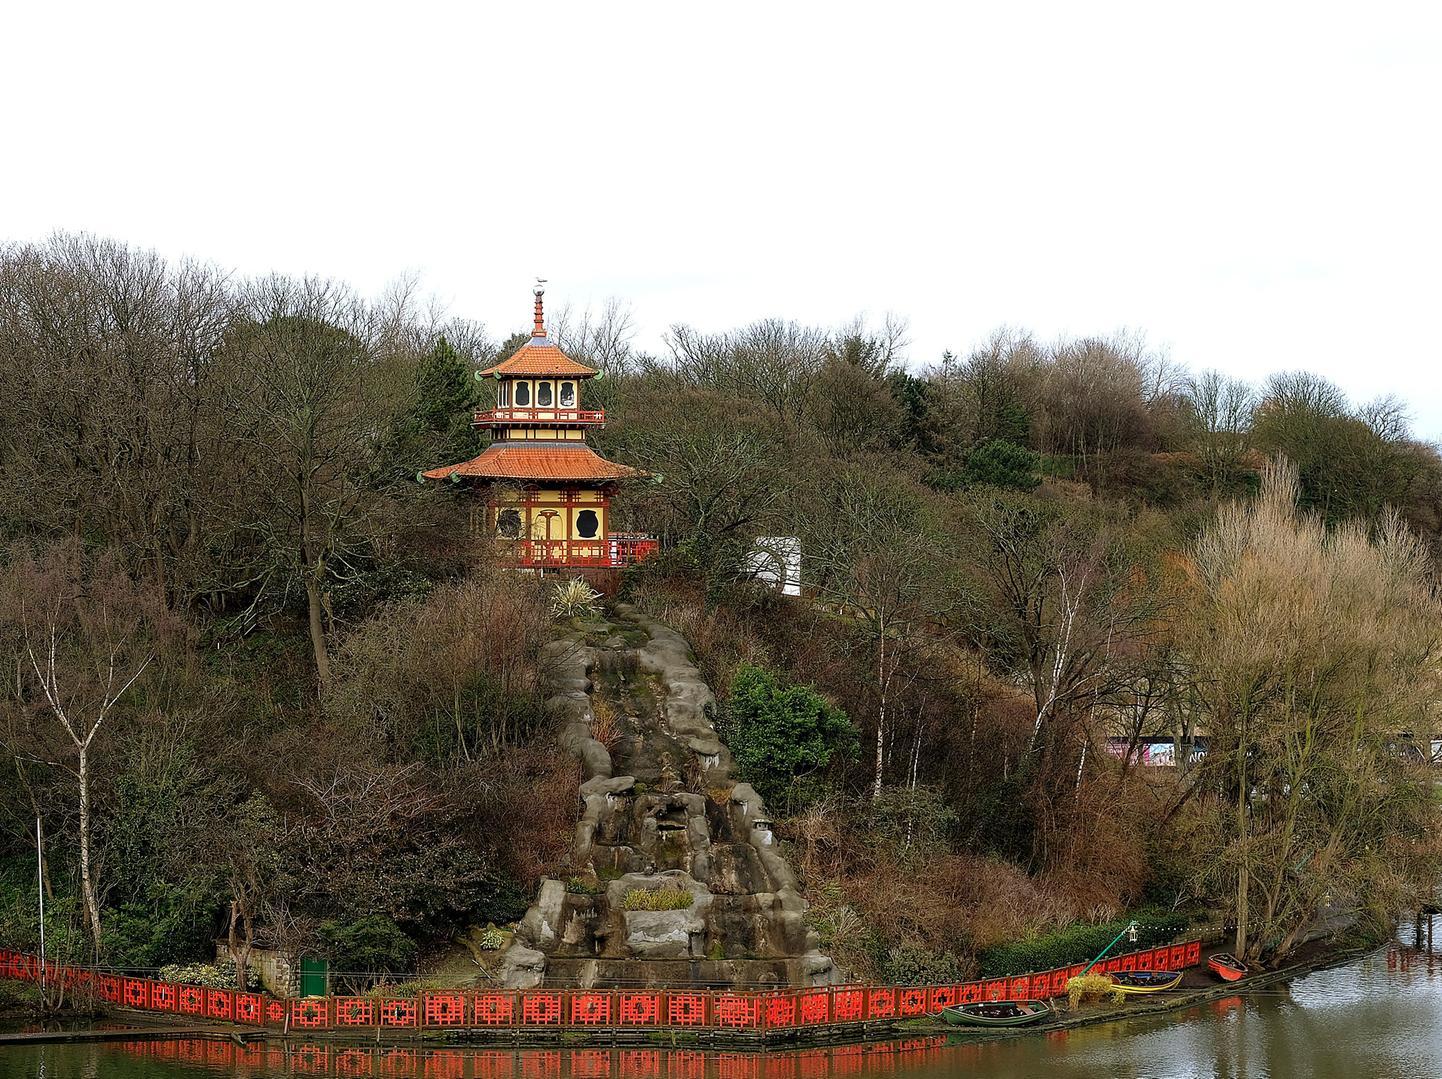 After a quiet walk around Peasholm Park, and a short climb to the top of the island youll find yourself in a Japanese-inspired corner outside the pagoda, a quaint place to get down on one knee.